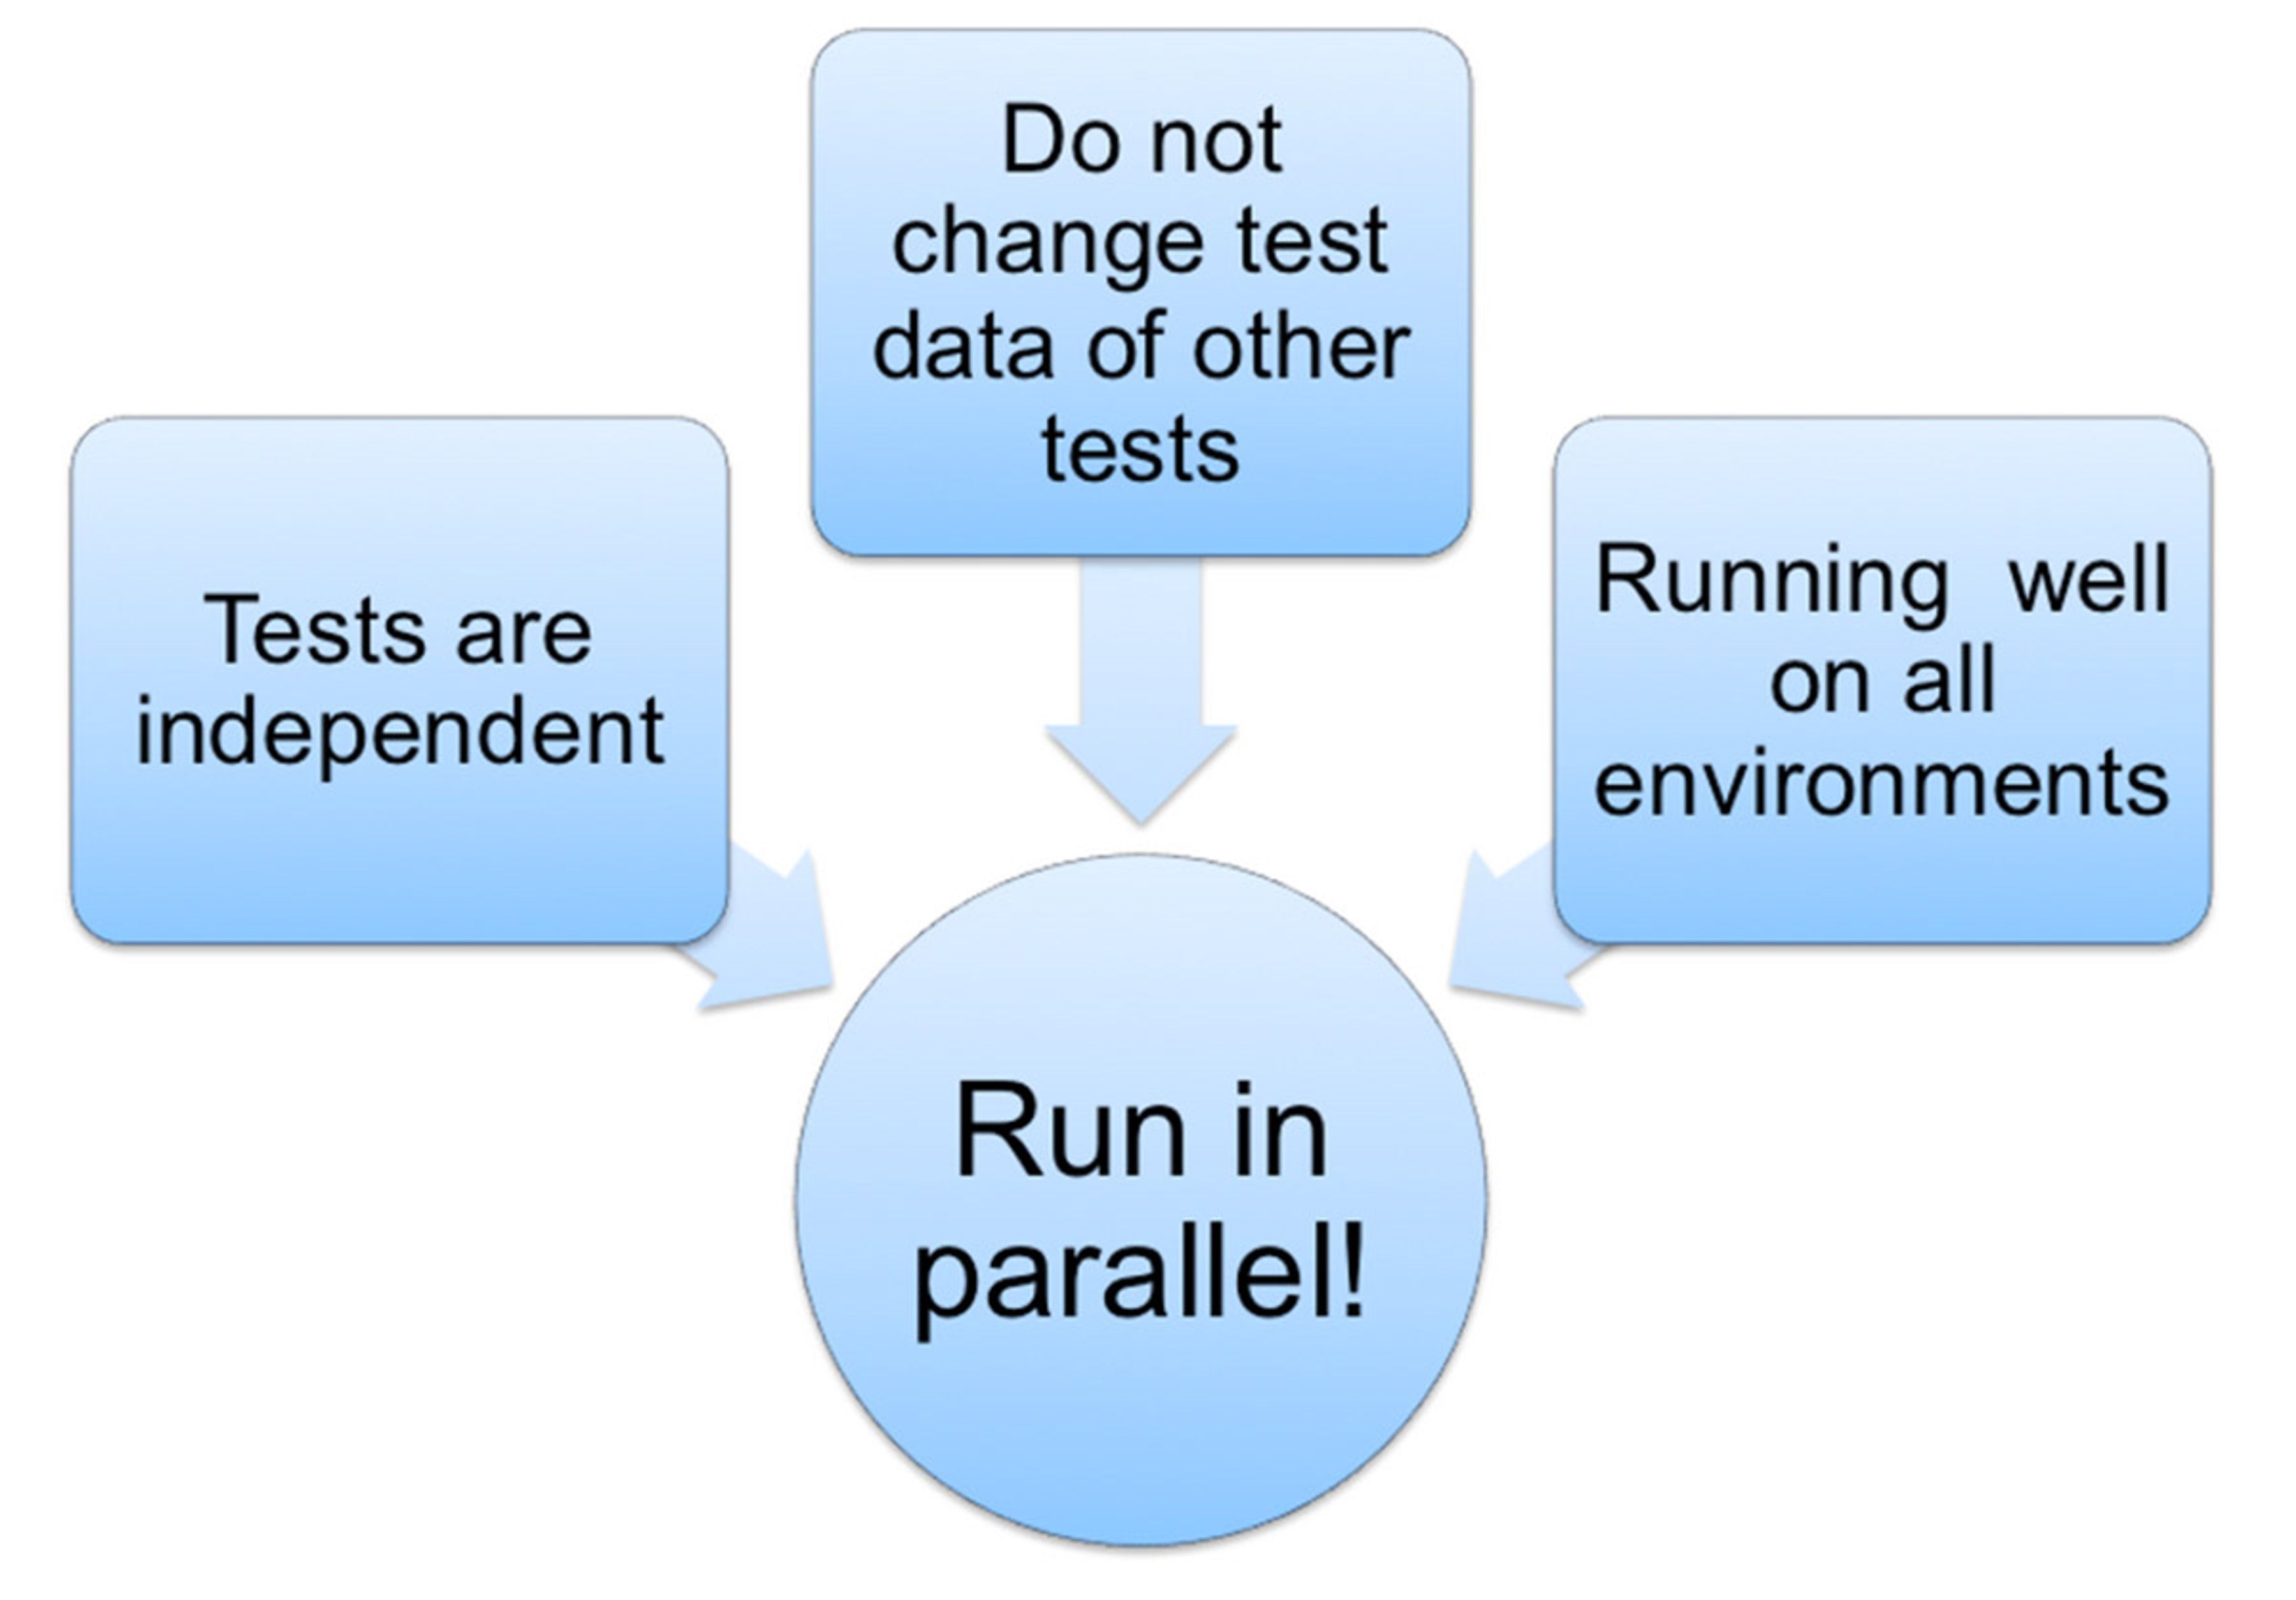 Diagram showing the solution of running tests in parallel by designing test data properly.